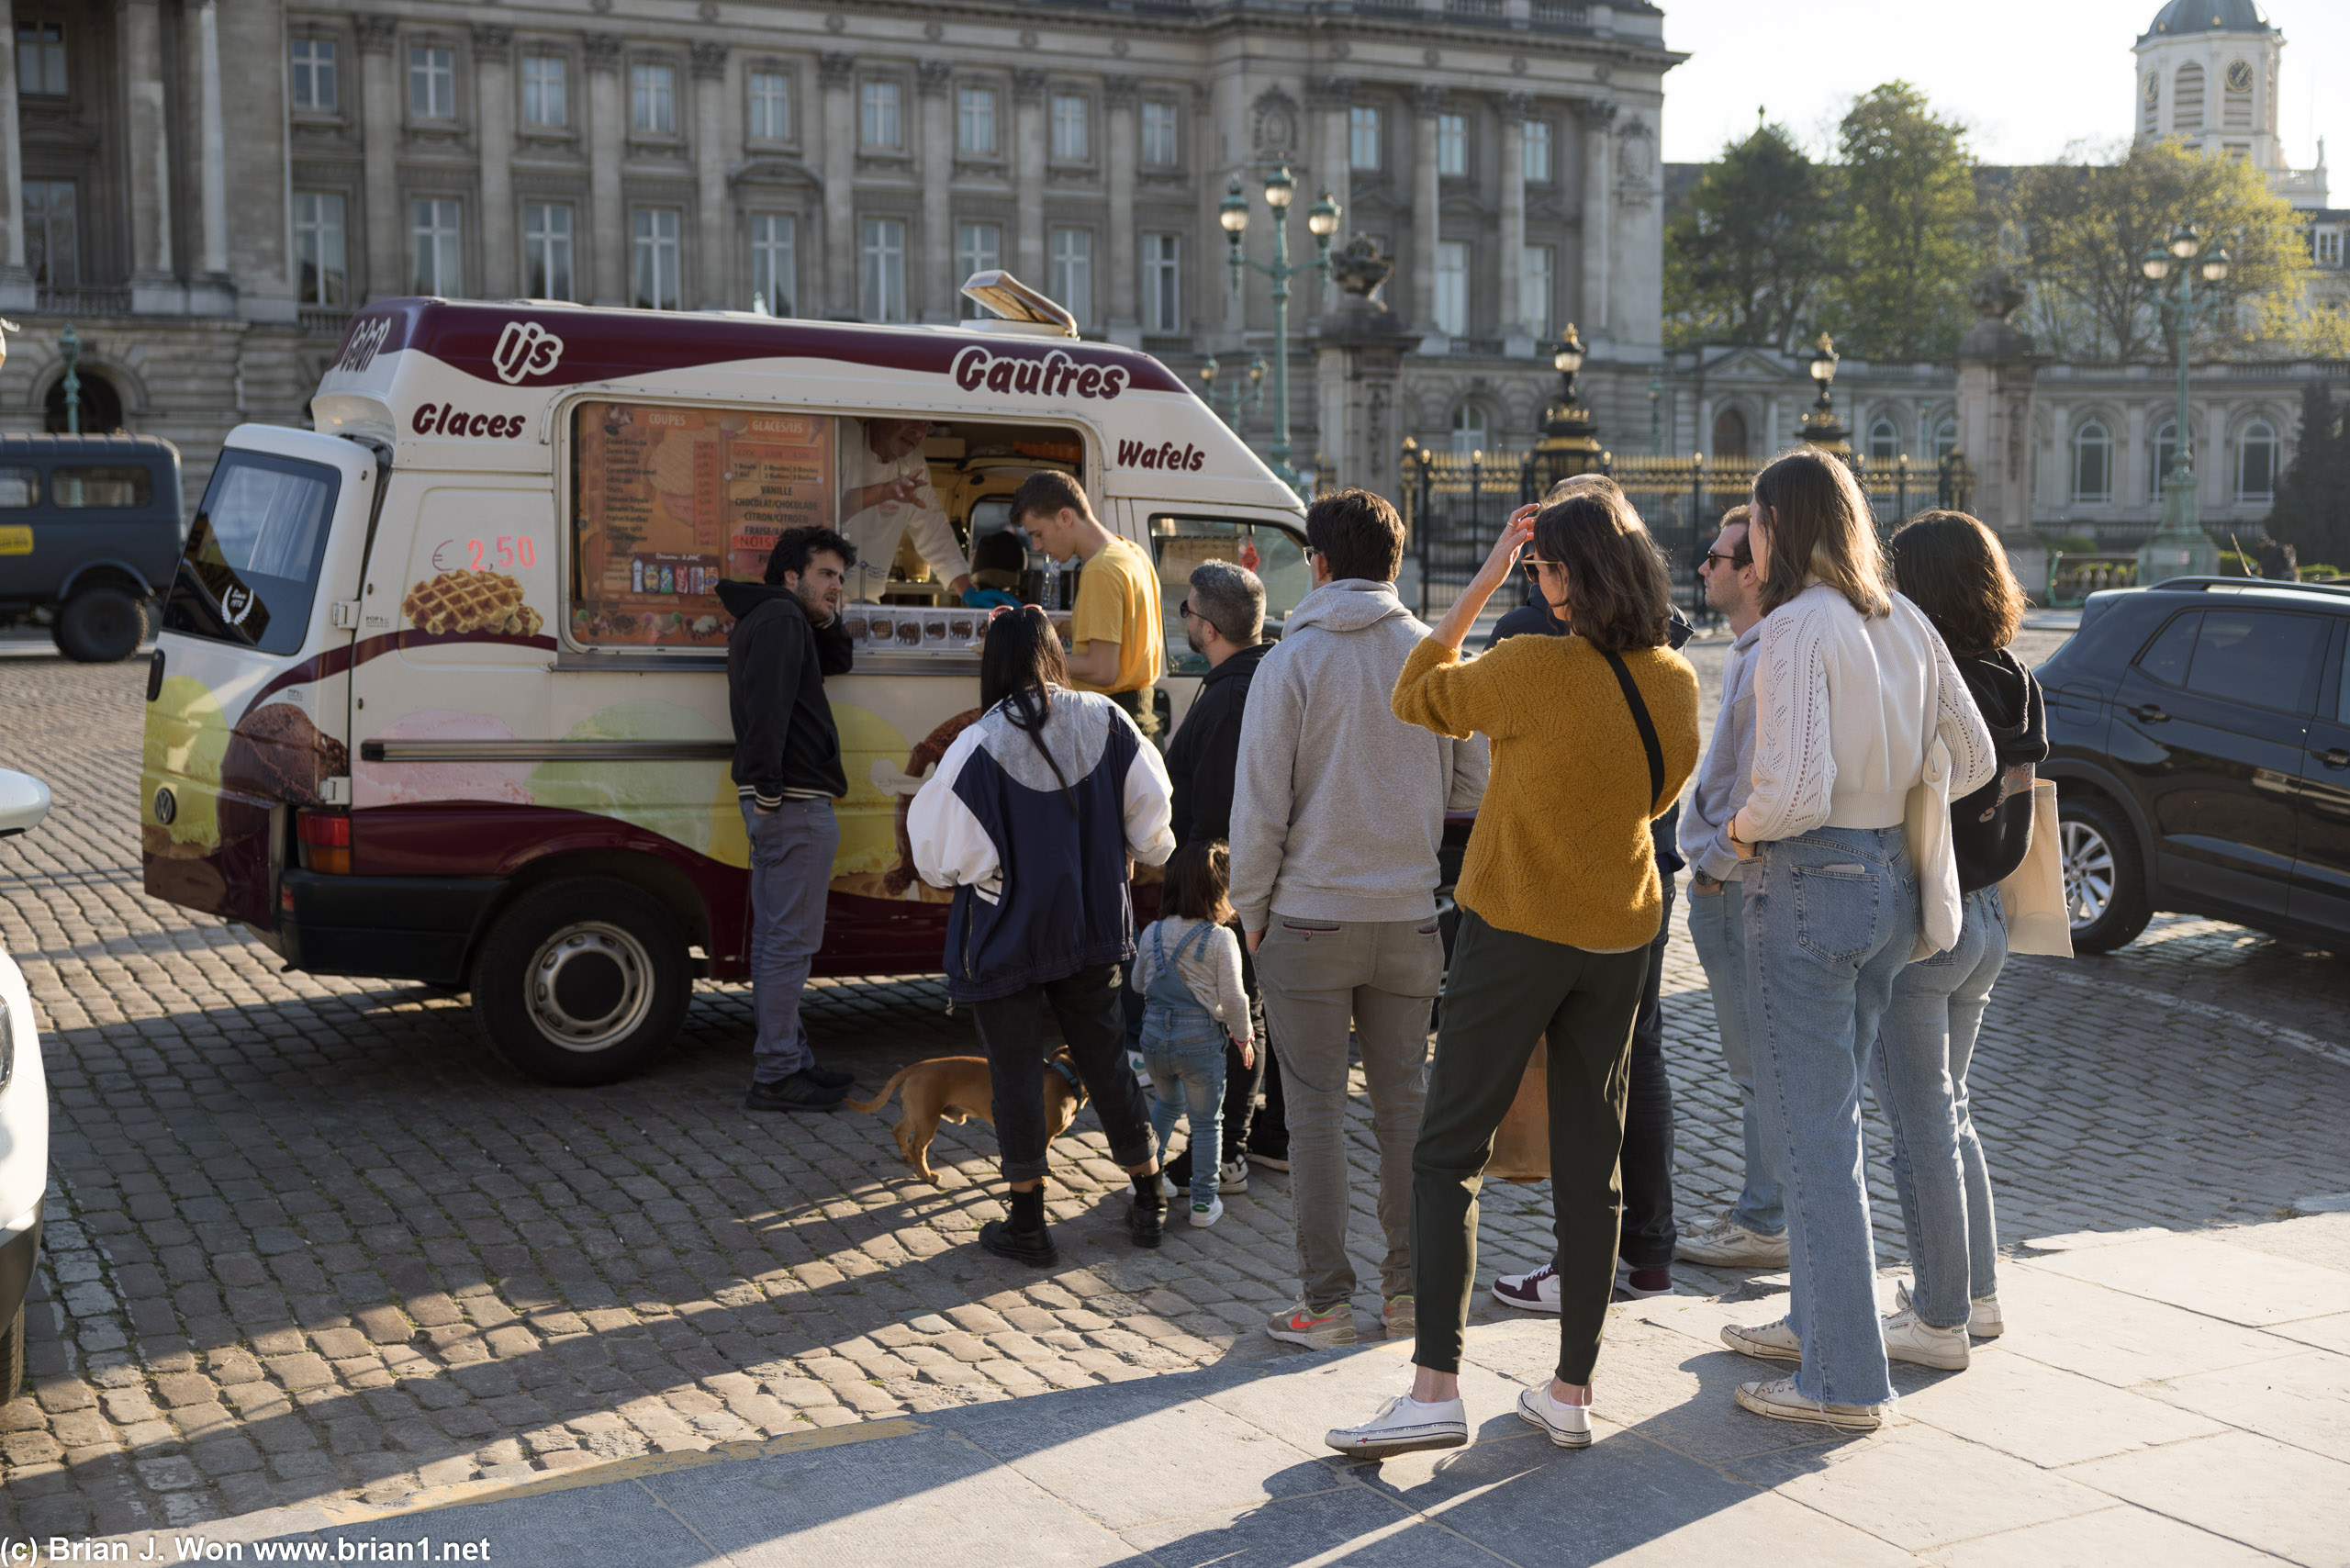 Popular waffle truck parked in front of the royal palace.